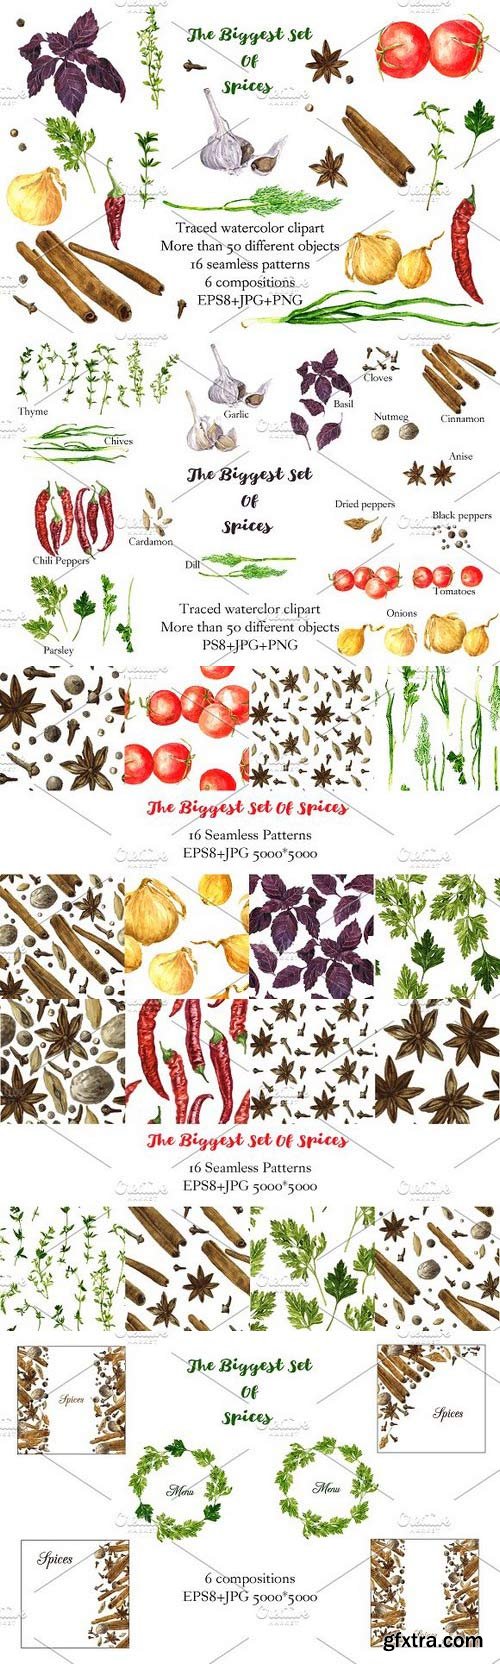 CM - The biggest watercolor set of spices 686299